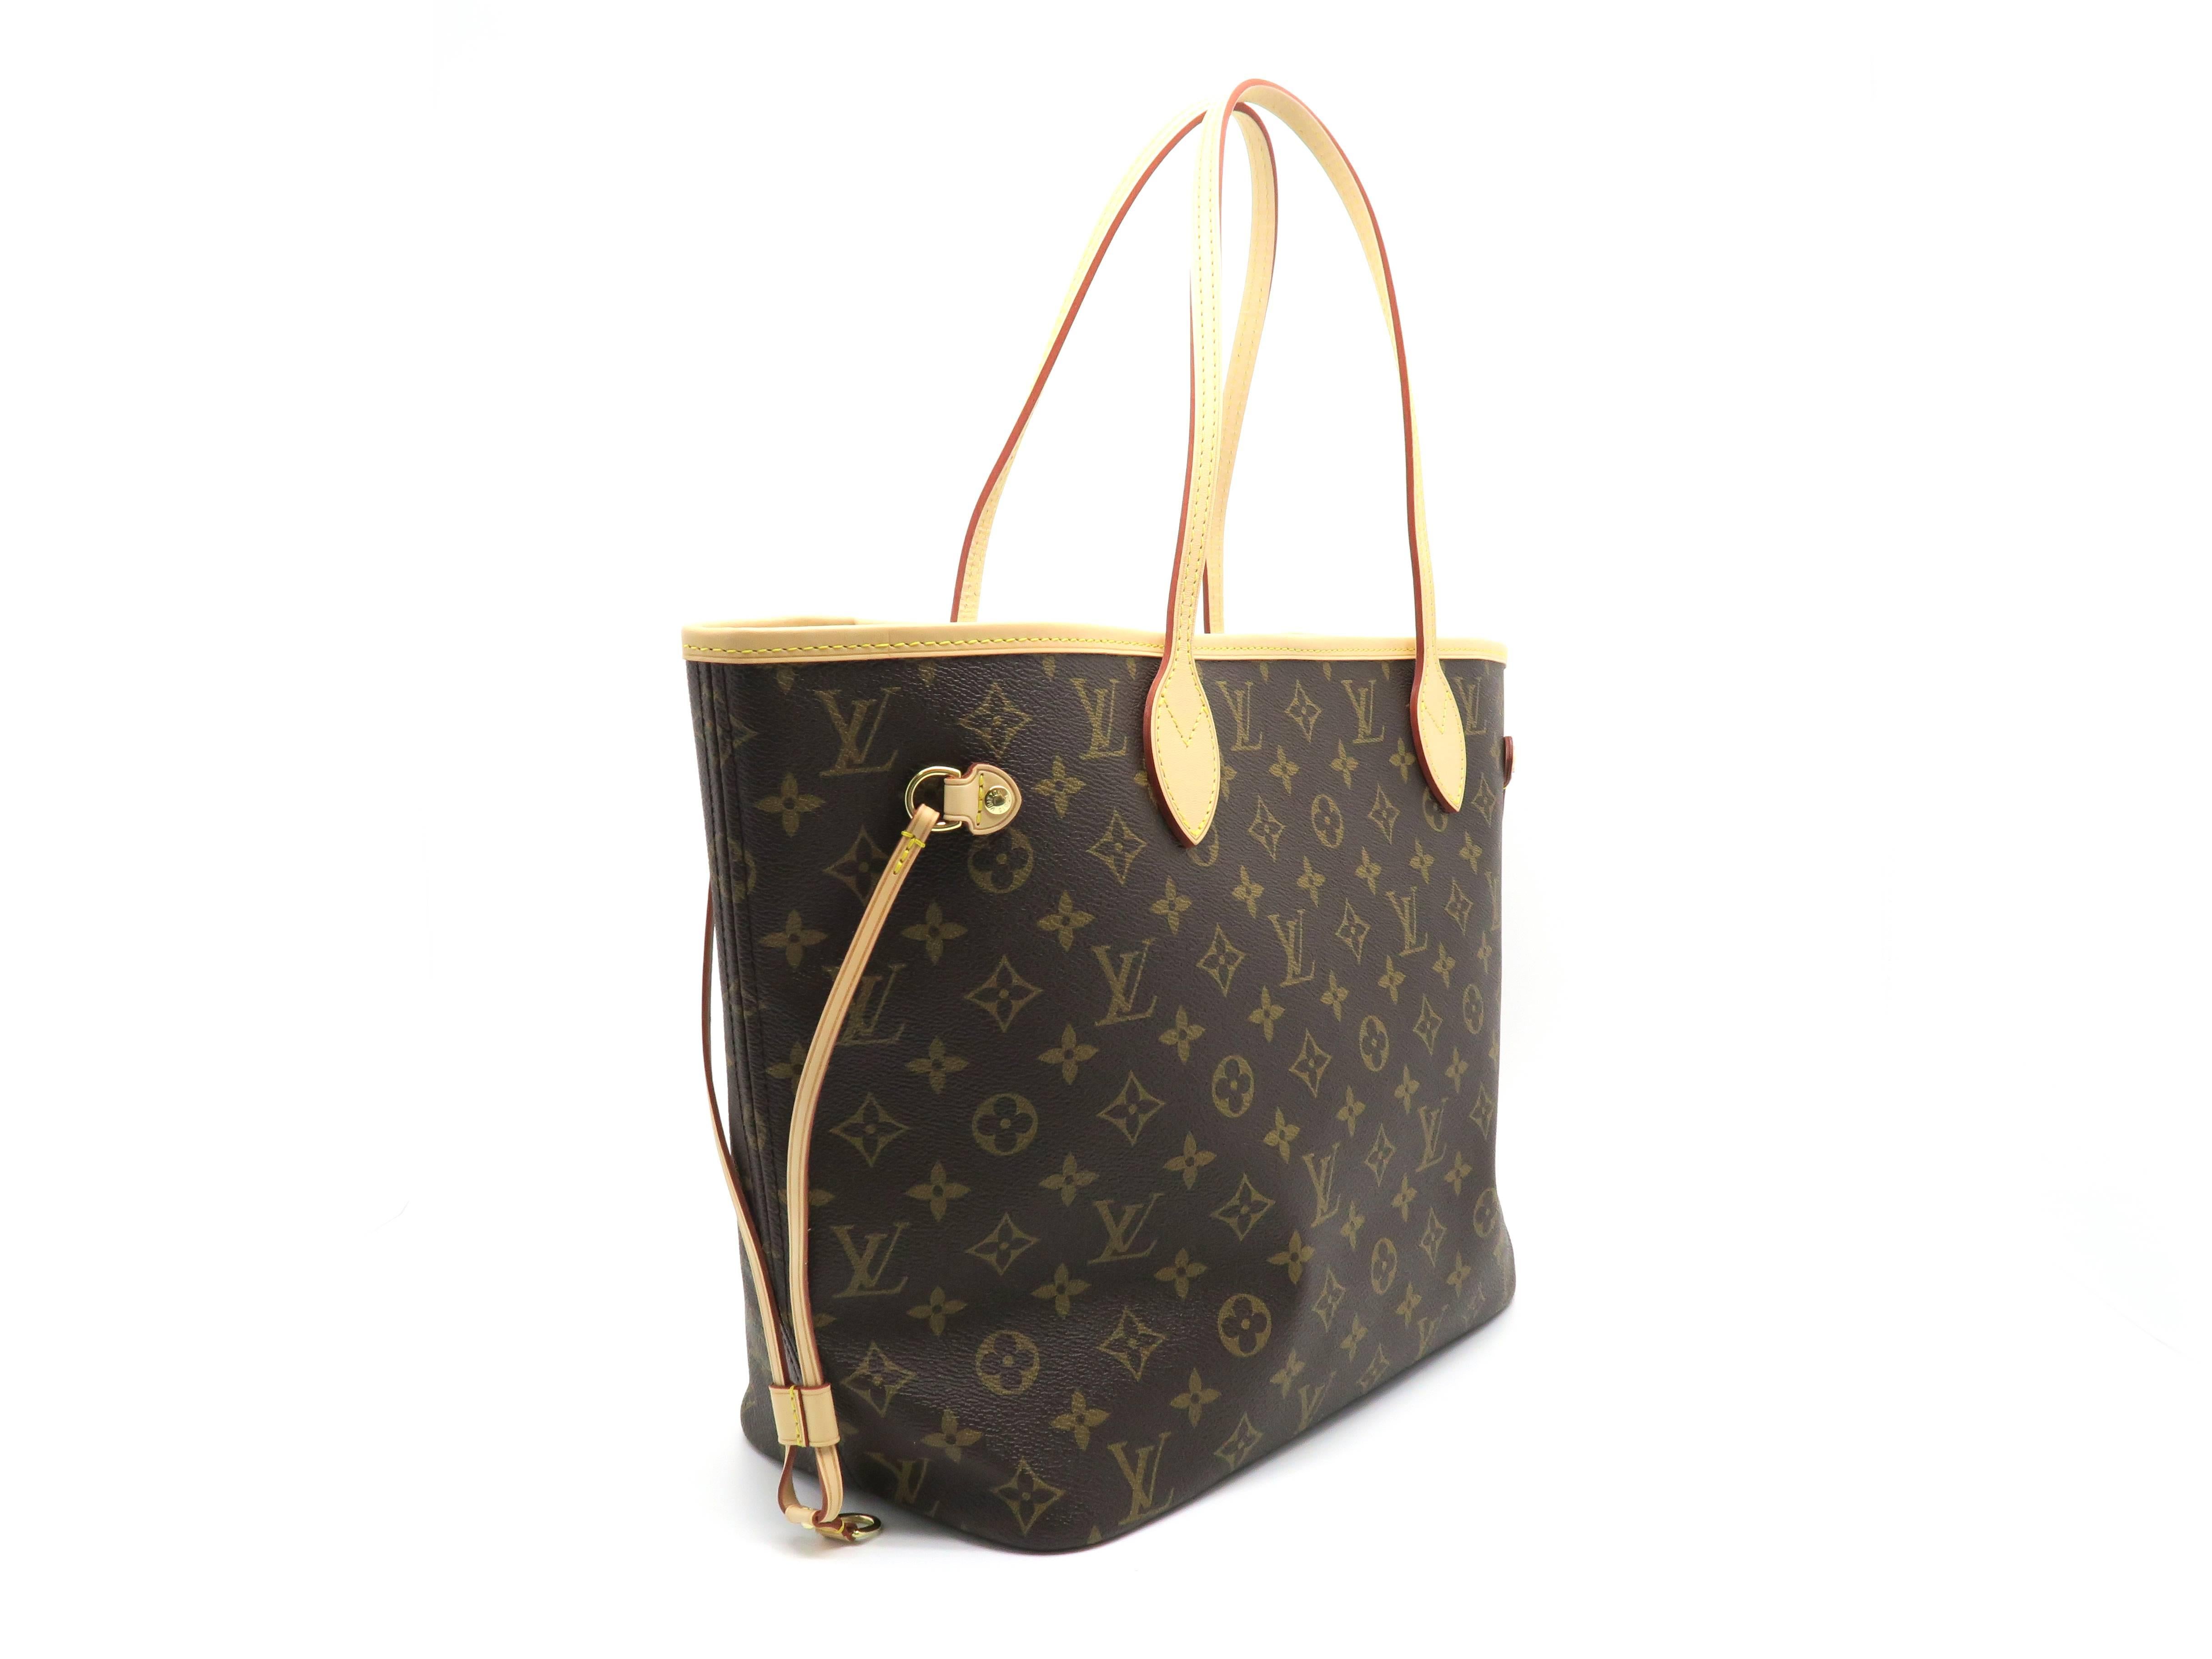 Color: Brown

Material: Monogram Canvas

Condition: New  
Overall: Brand New, Not Used
Surface: Good
Corners: Good
Edges: Good
Handles/Straps: Good 
Hardware: Good


Dimension: W32 × H29 × D17cm（W12.5" × H11.4" × D6.6"）
Shoulder